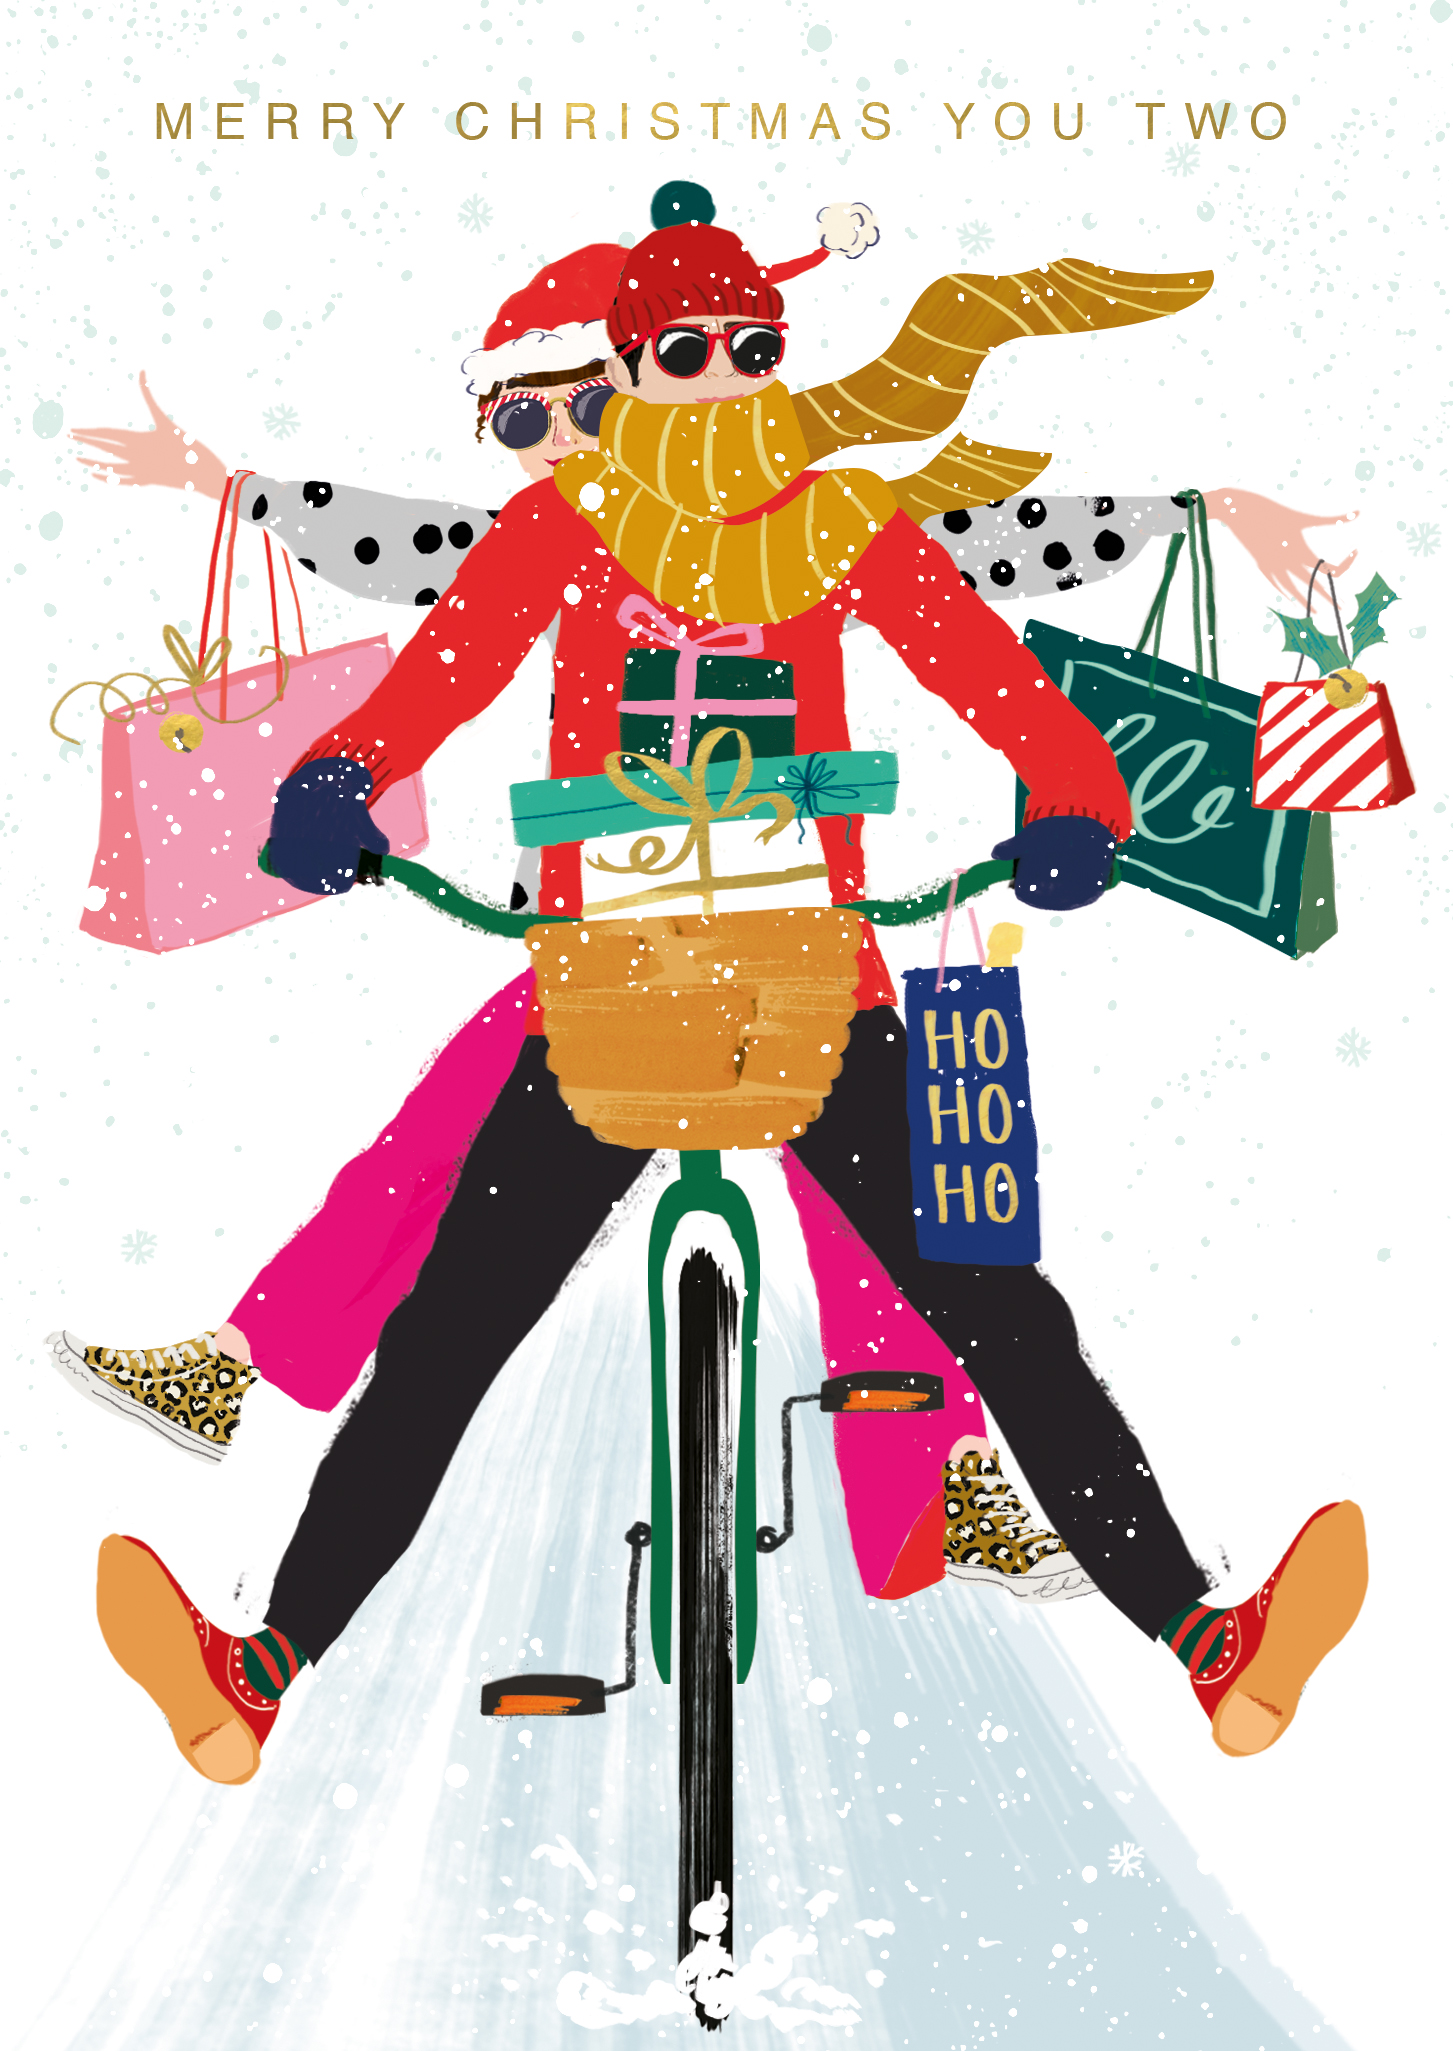 Above: Full of joie de vivre, illustrated by Sarah Long courtesy of The Bright Agency.